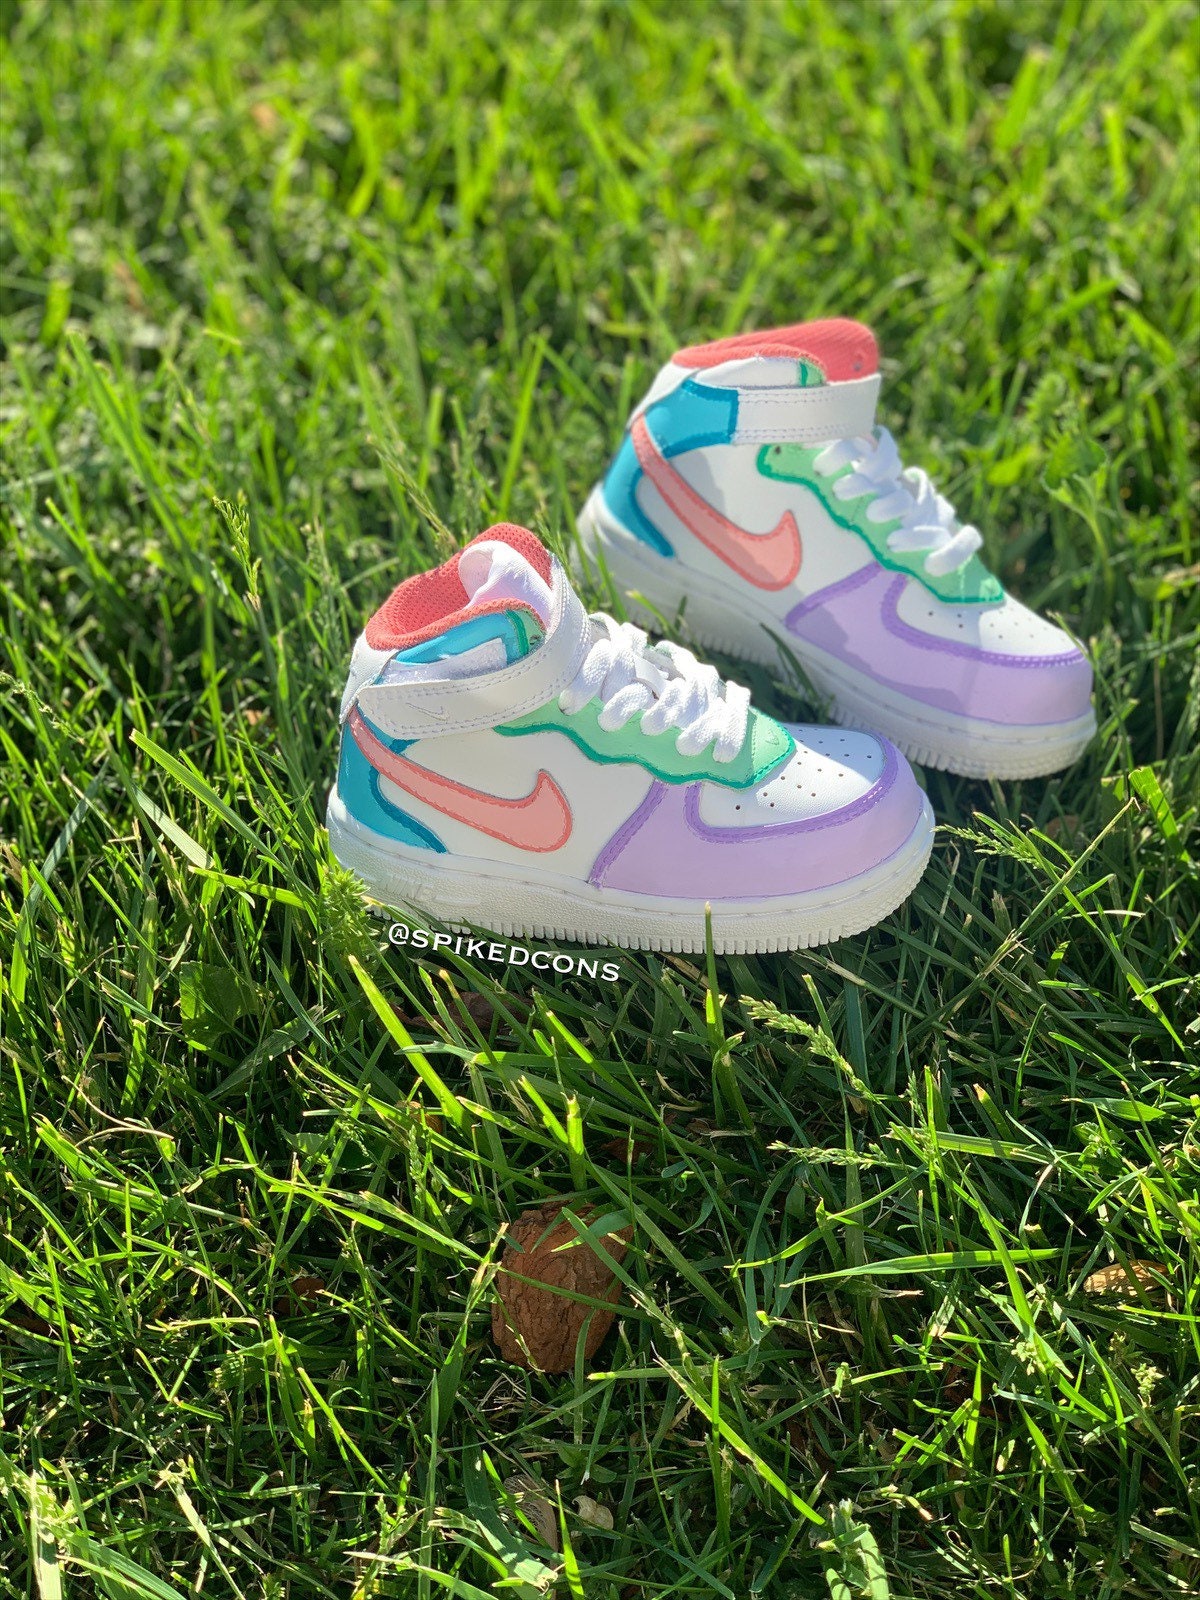 Cotton Candy” Air Force 1's hand-crafted by yours truly. www